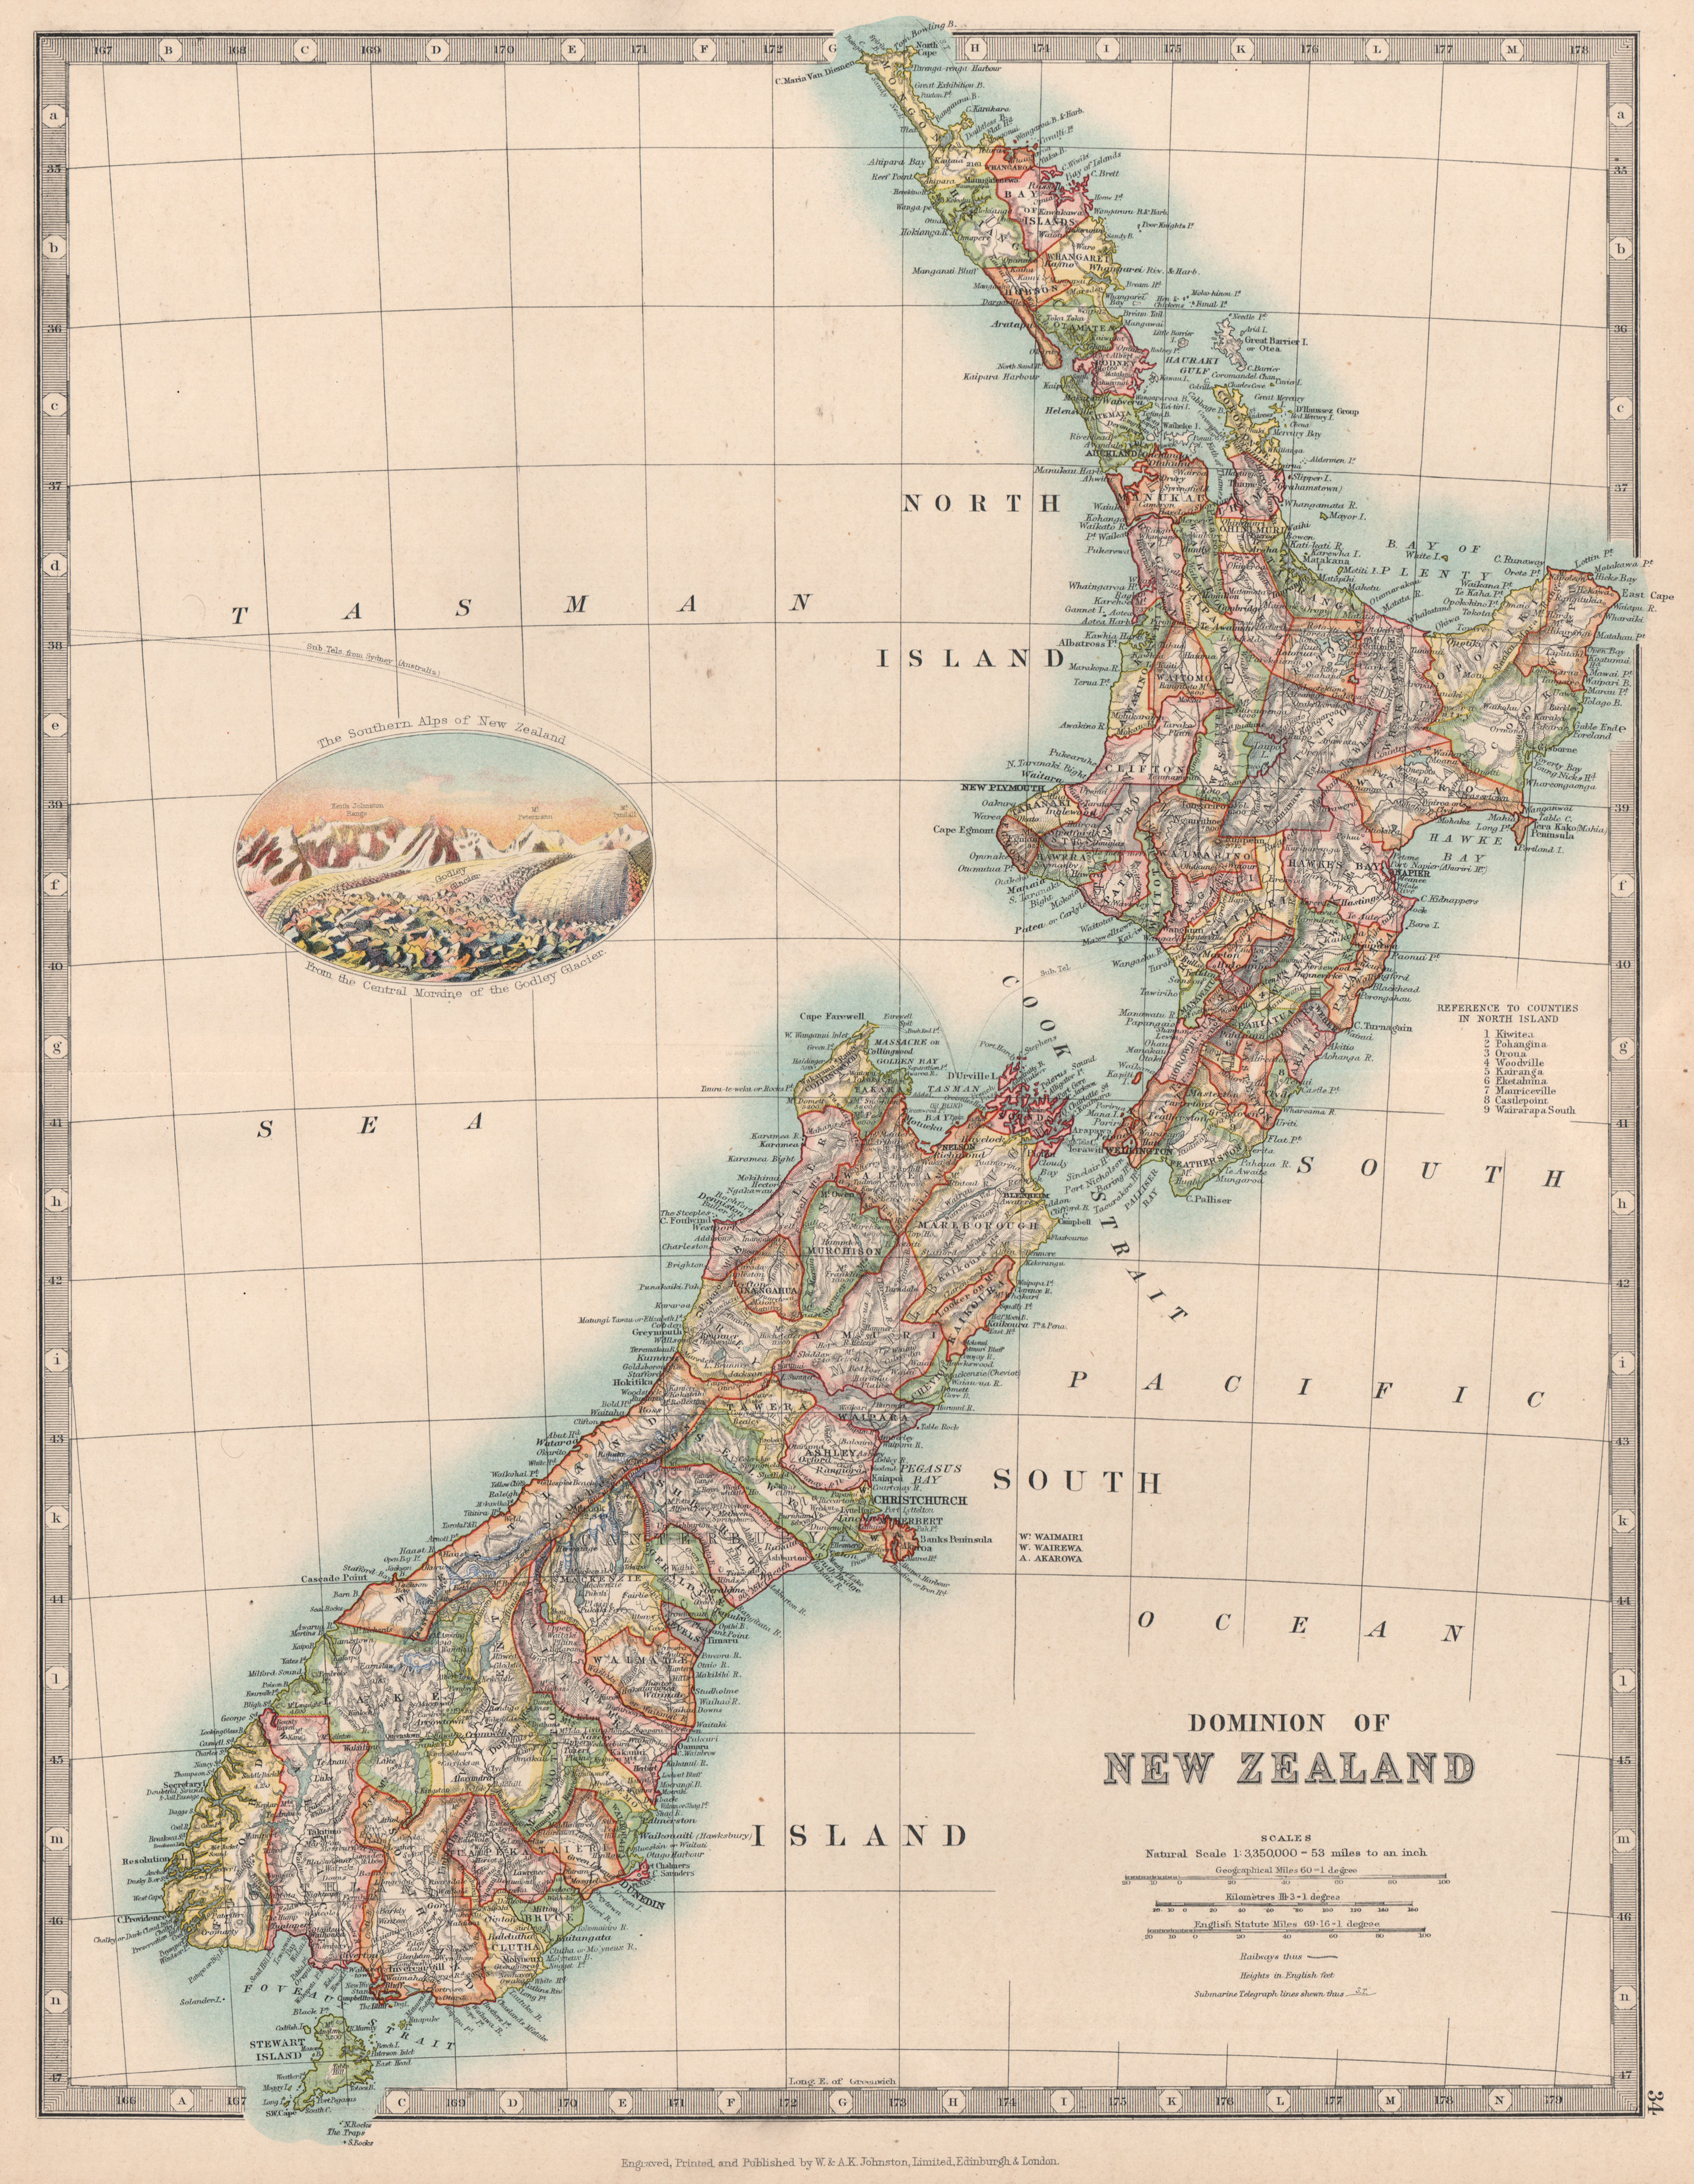 Associate Product DOMINION OF NEW ZEALAND in counties. Godley Glacier vignette. JOHNSTON 1912 map